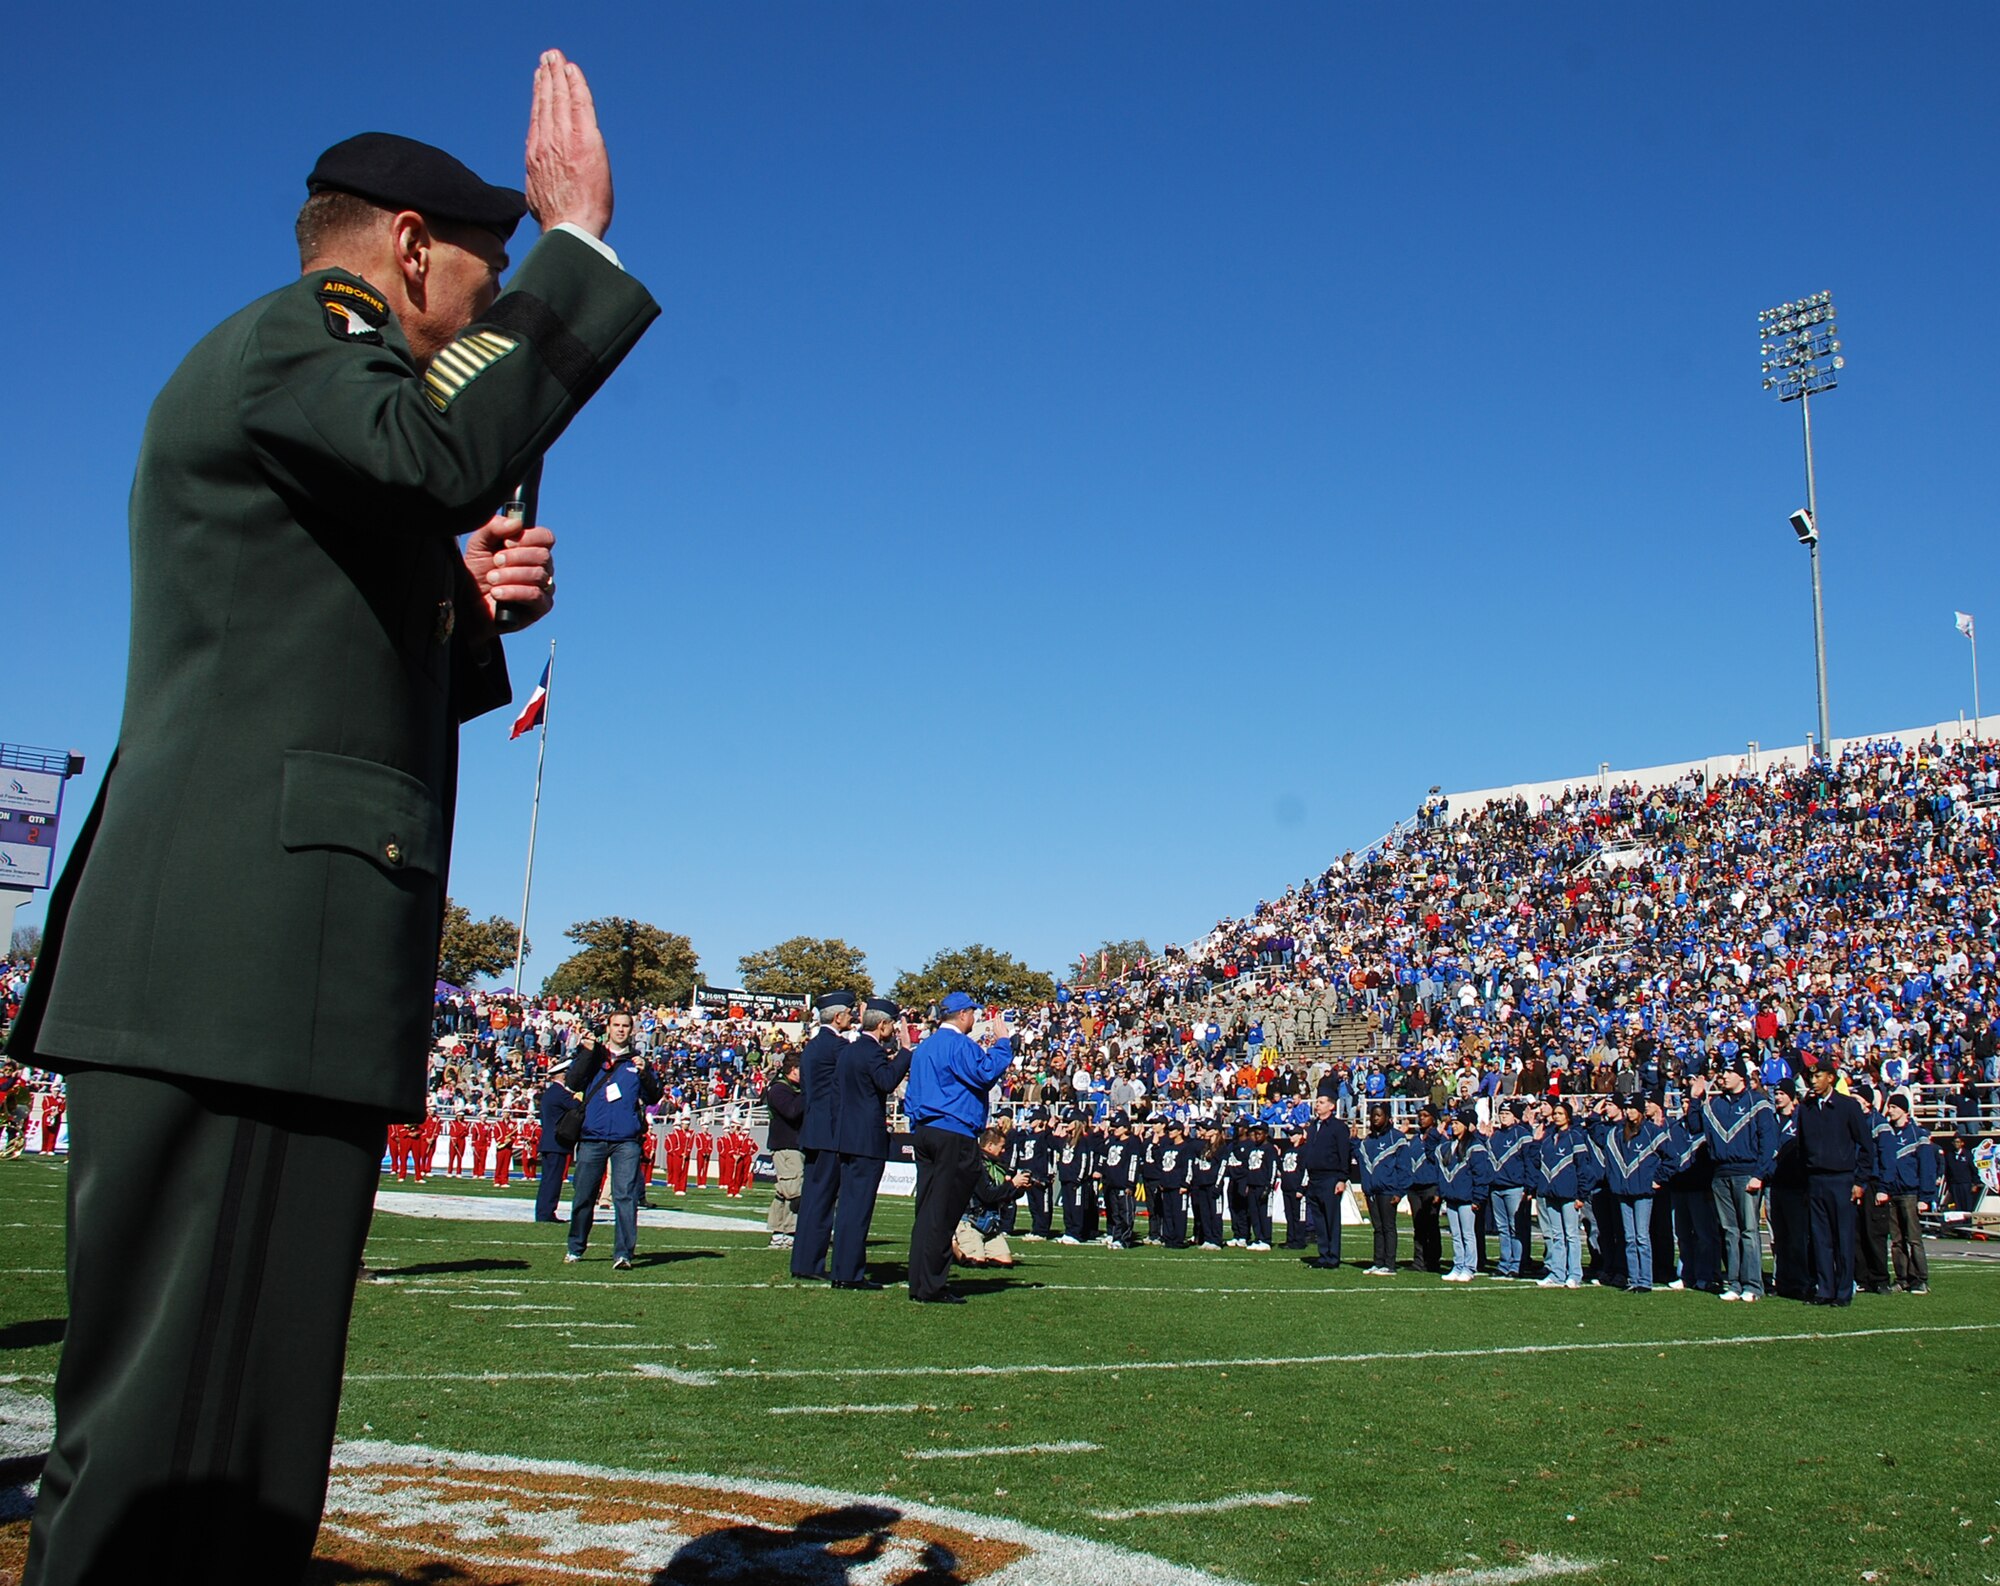 General David H. Petraeus, U.S. Central Command commander, leads a mass enlistment for new enlistees of all the armed services during the Armed Forces Bowl halftime. Gen. Patraeus was also named the 2008 Great American Patriot Award recipient. (U.S. Air Force Photo/Tech. Sgt. Julie Briden-Garcia)